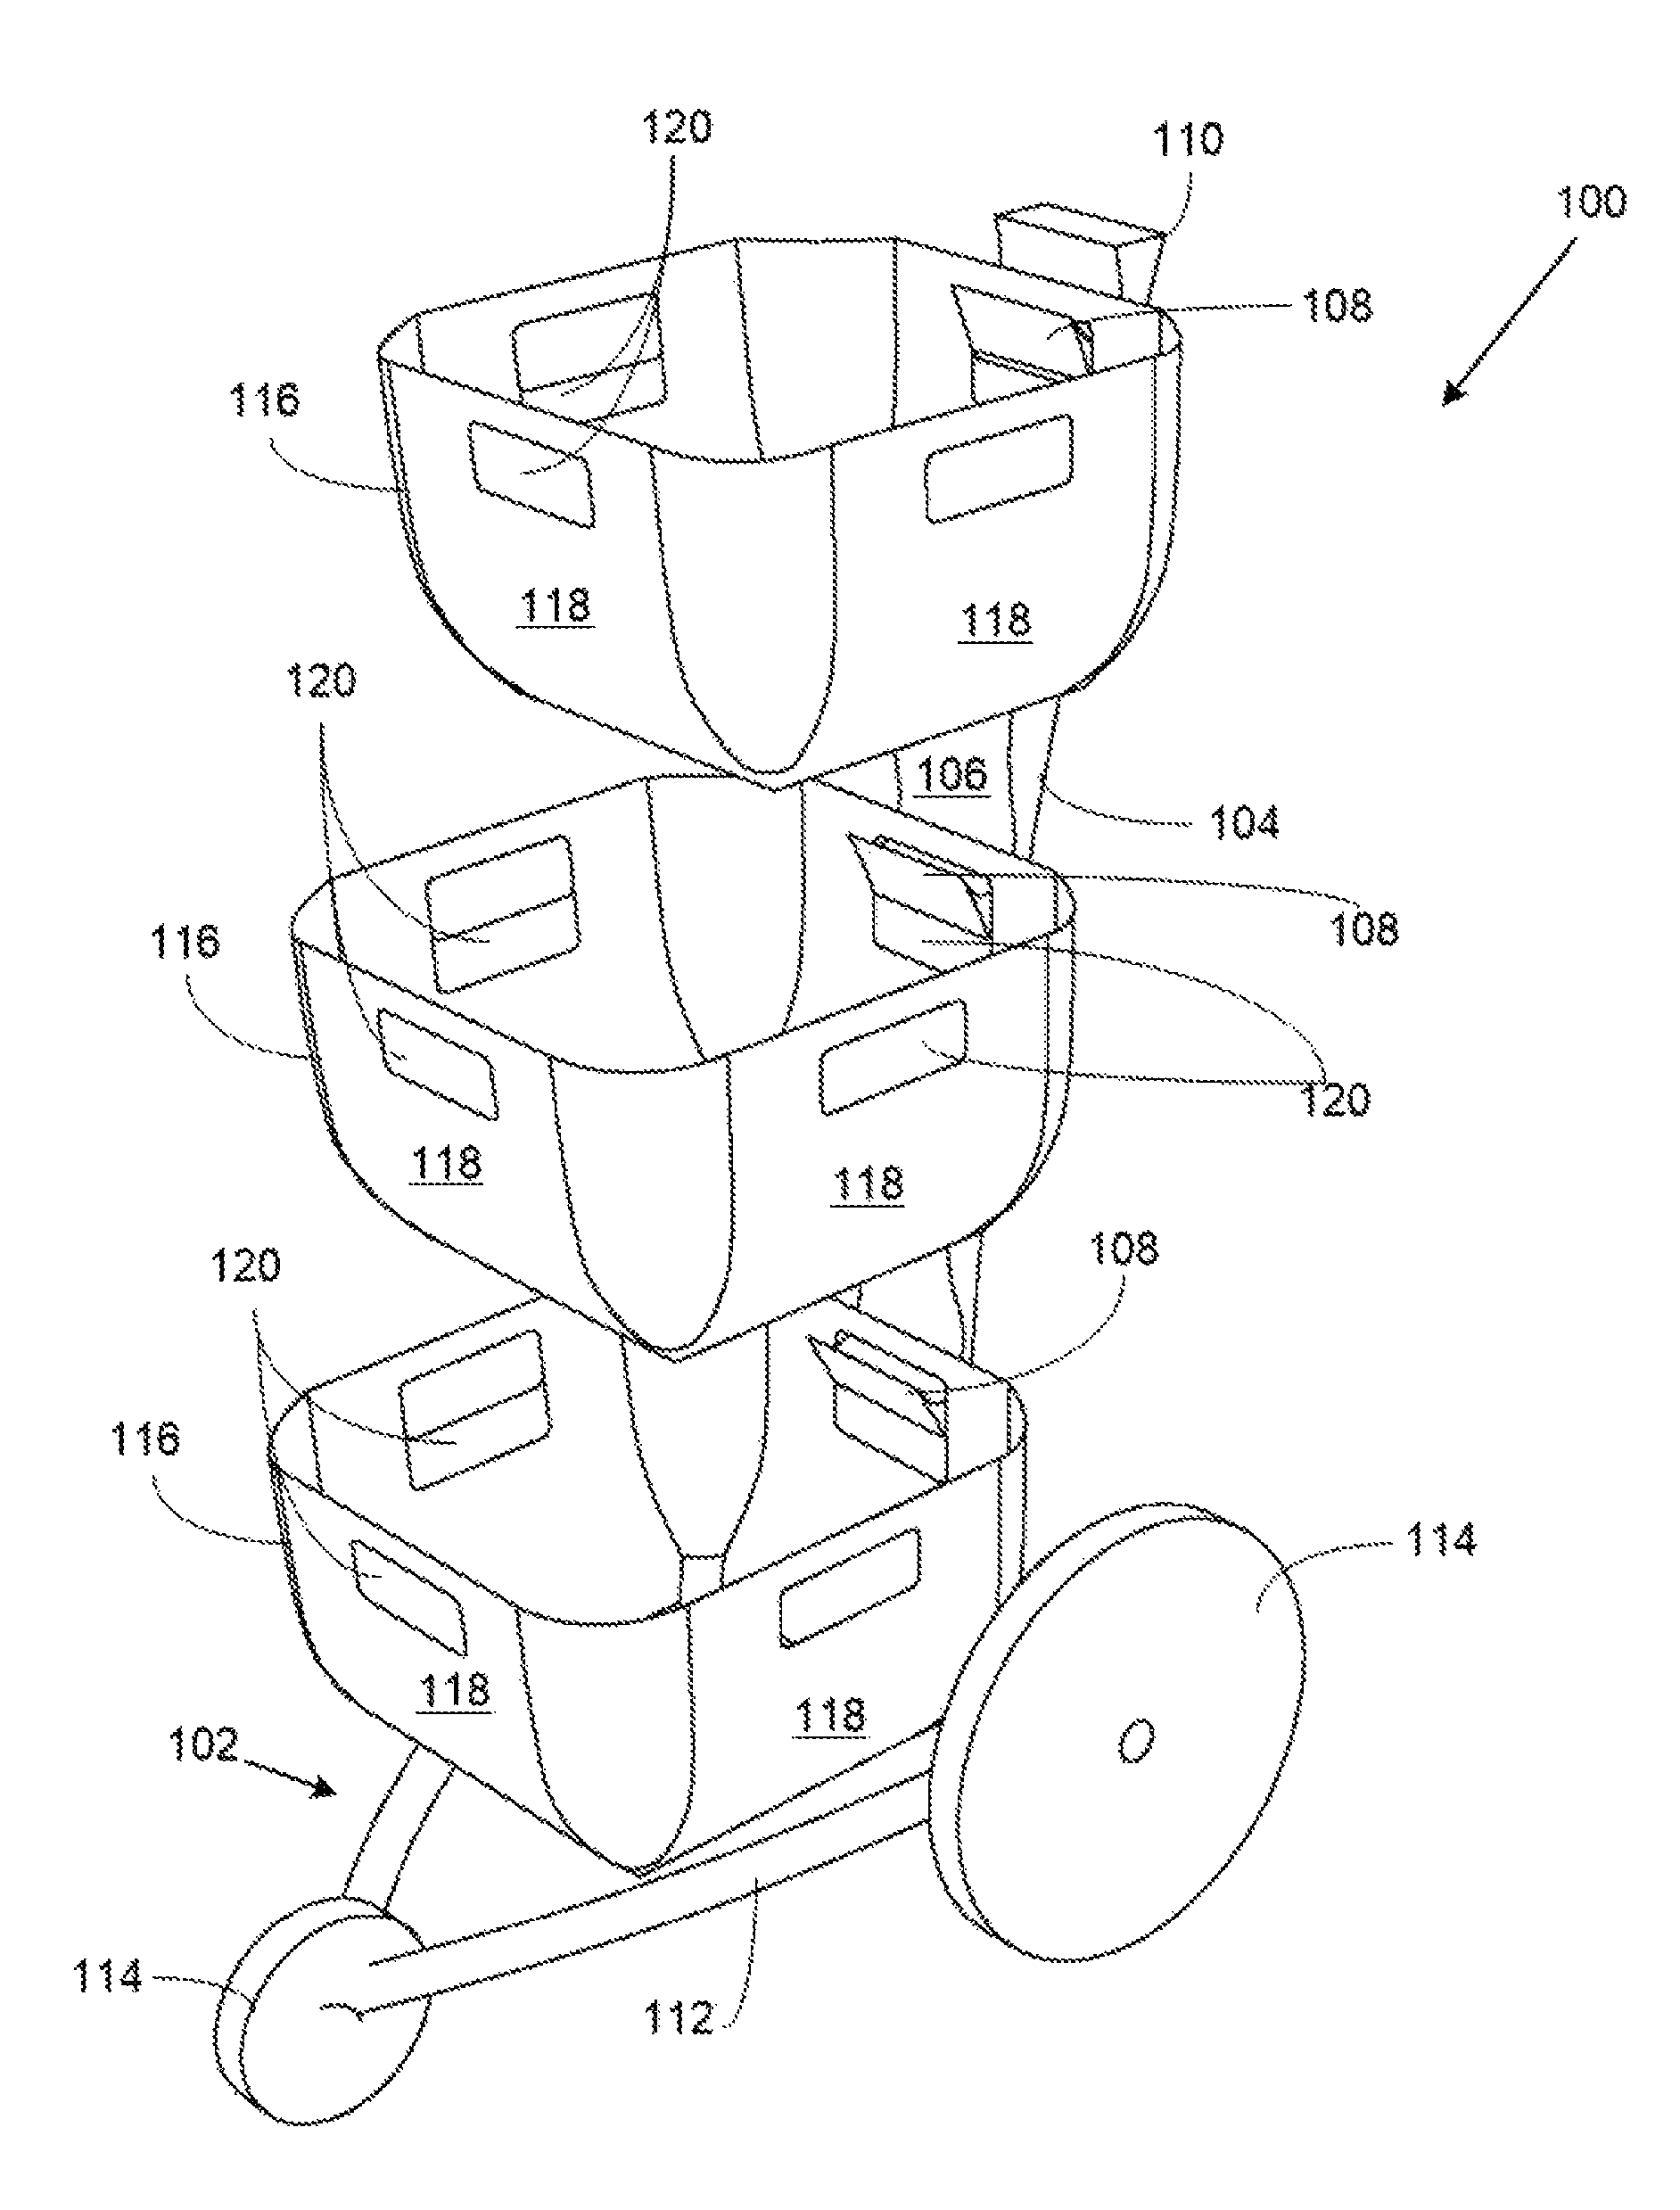 System and method for containing items